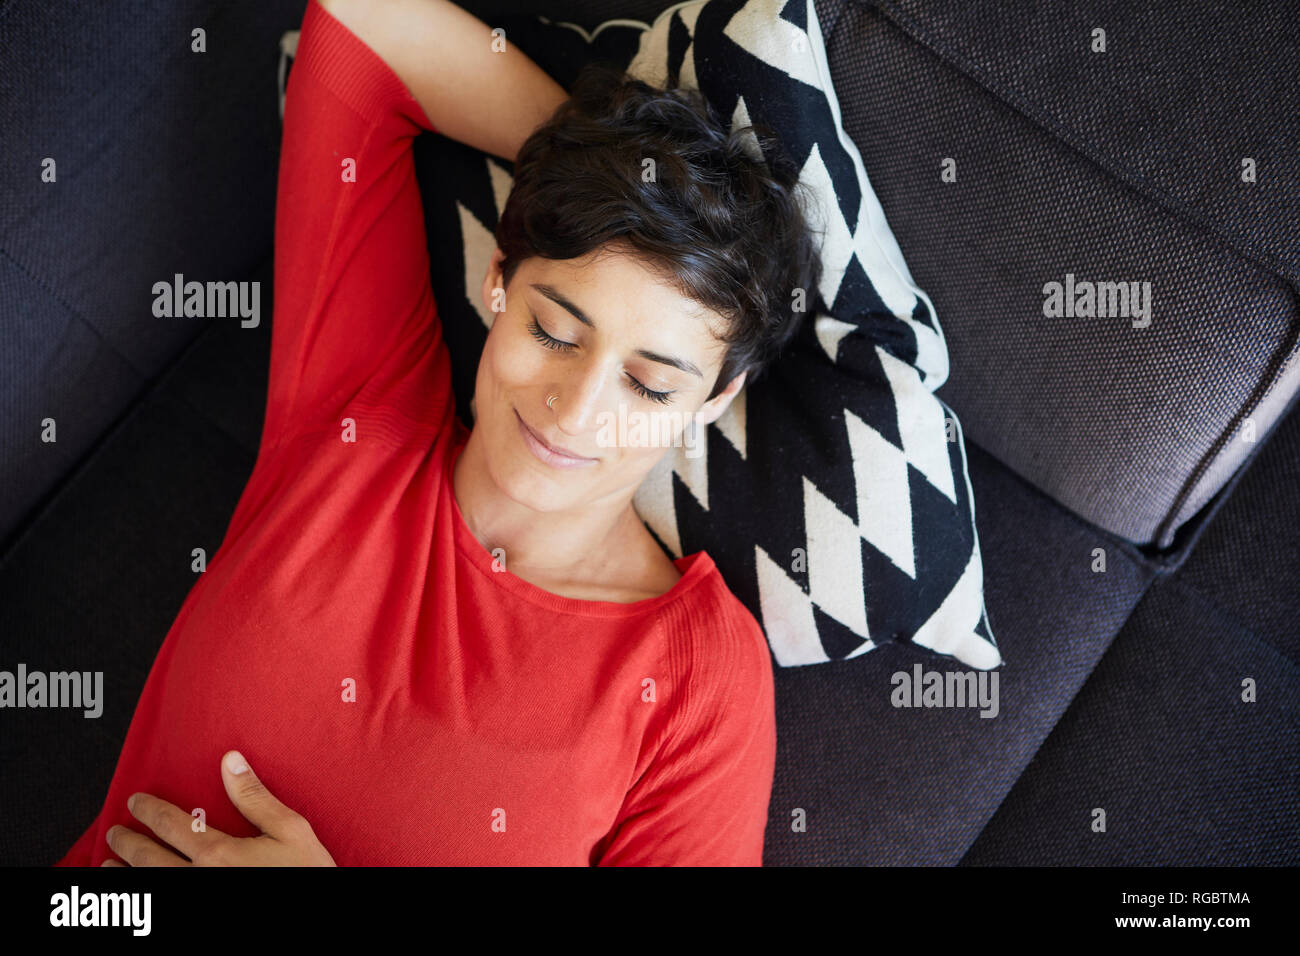 Smiling woman lying on couch at home with closed eyes Banque D'Images